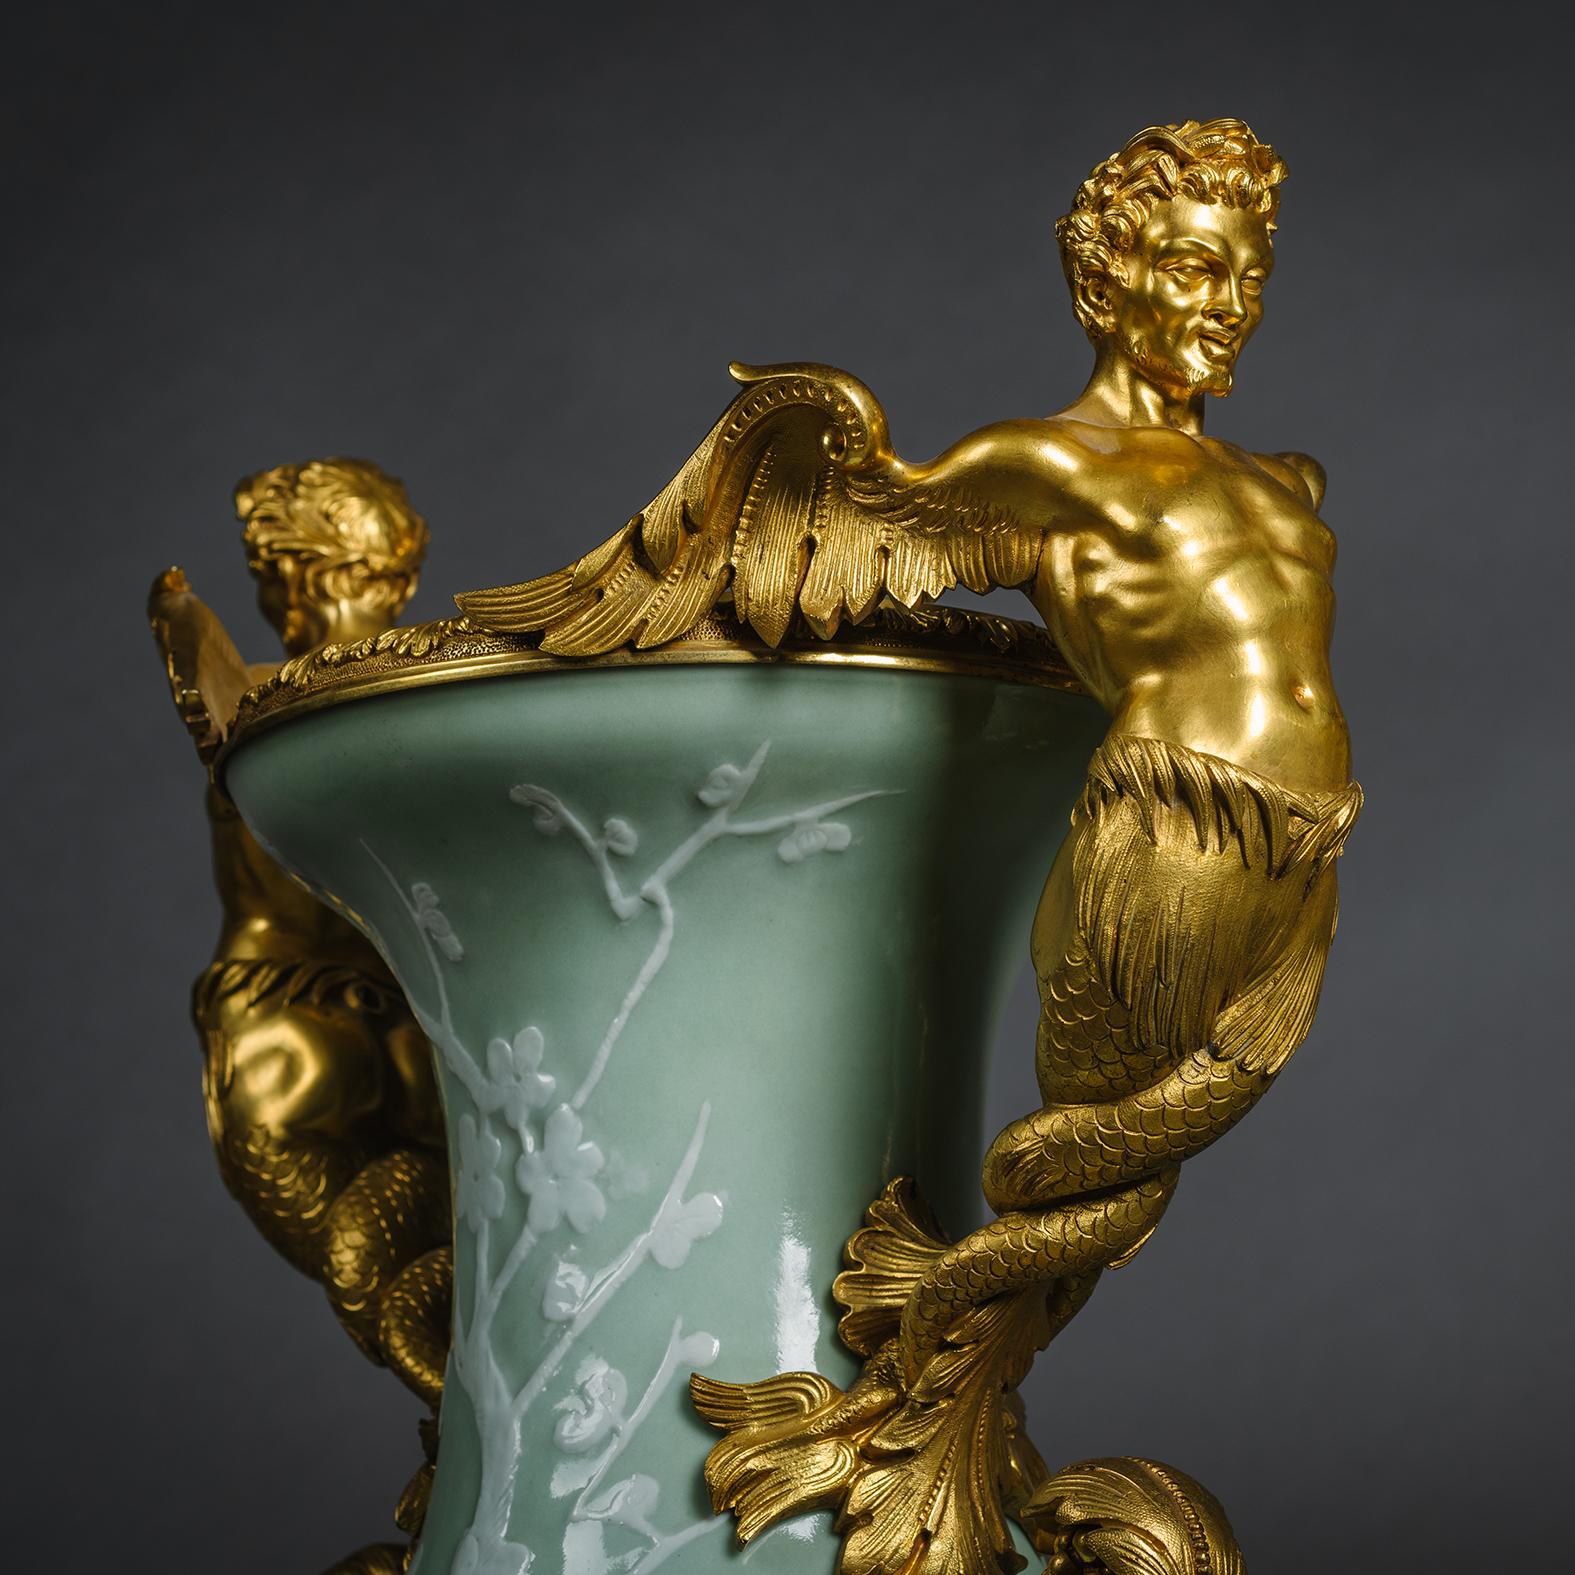 A Pair of Large Gilt-Bronze Mounted Chinese Celadon-Ground and Slip Decorated Porcelain Vases.

These vases of Chinese celadon porcelain from the late Quing Dynasty are slip-decorated with willow trees and prunus flowers. The finely sculpted